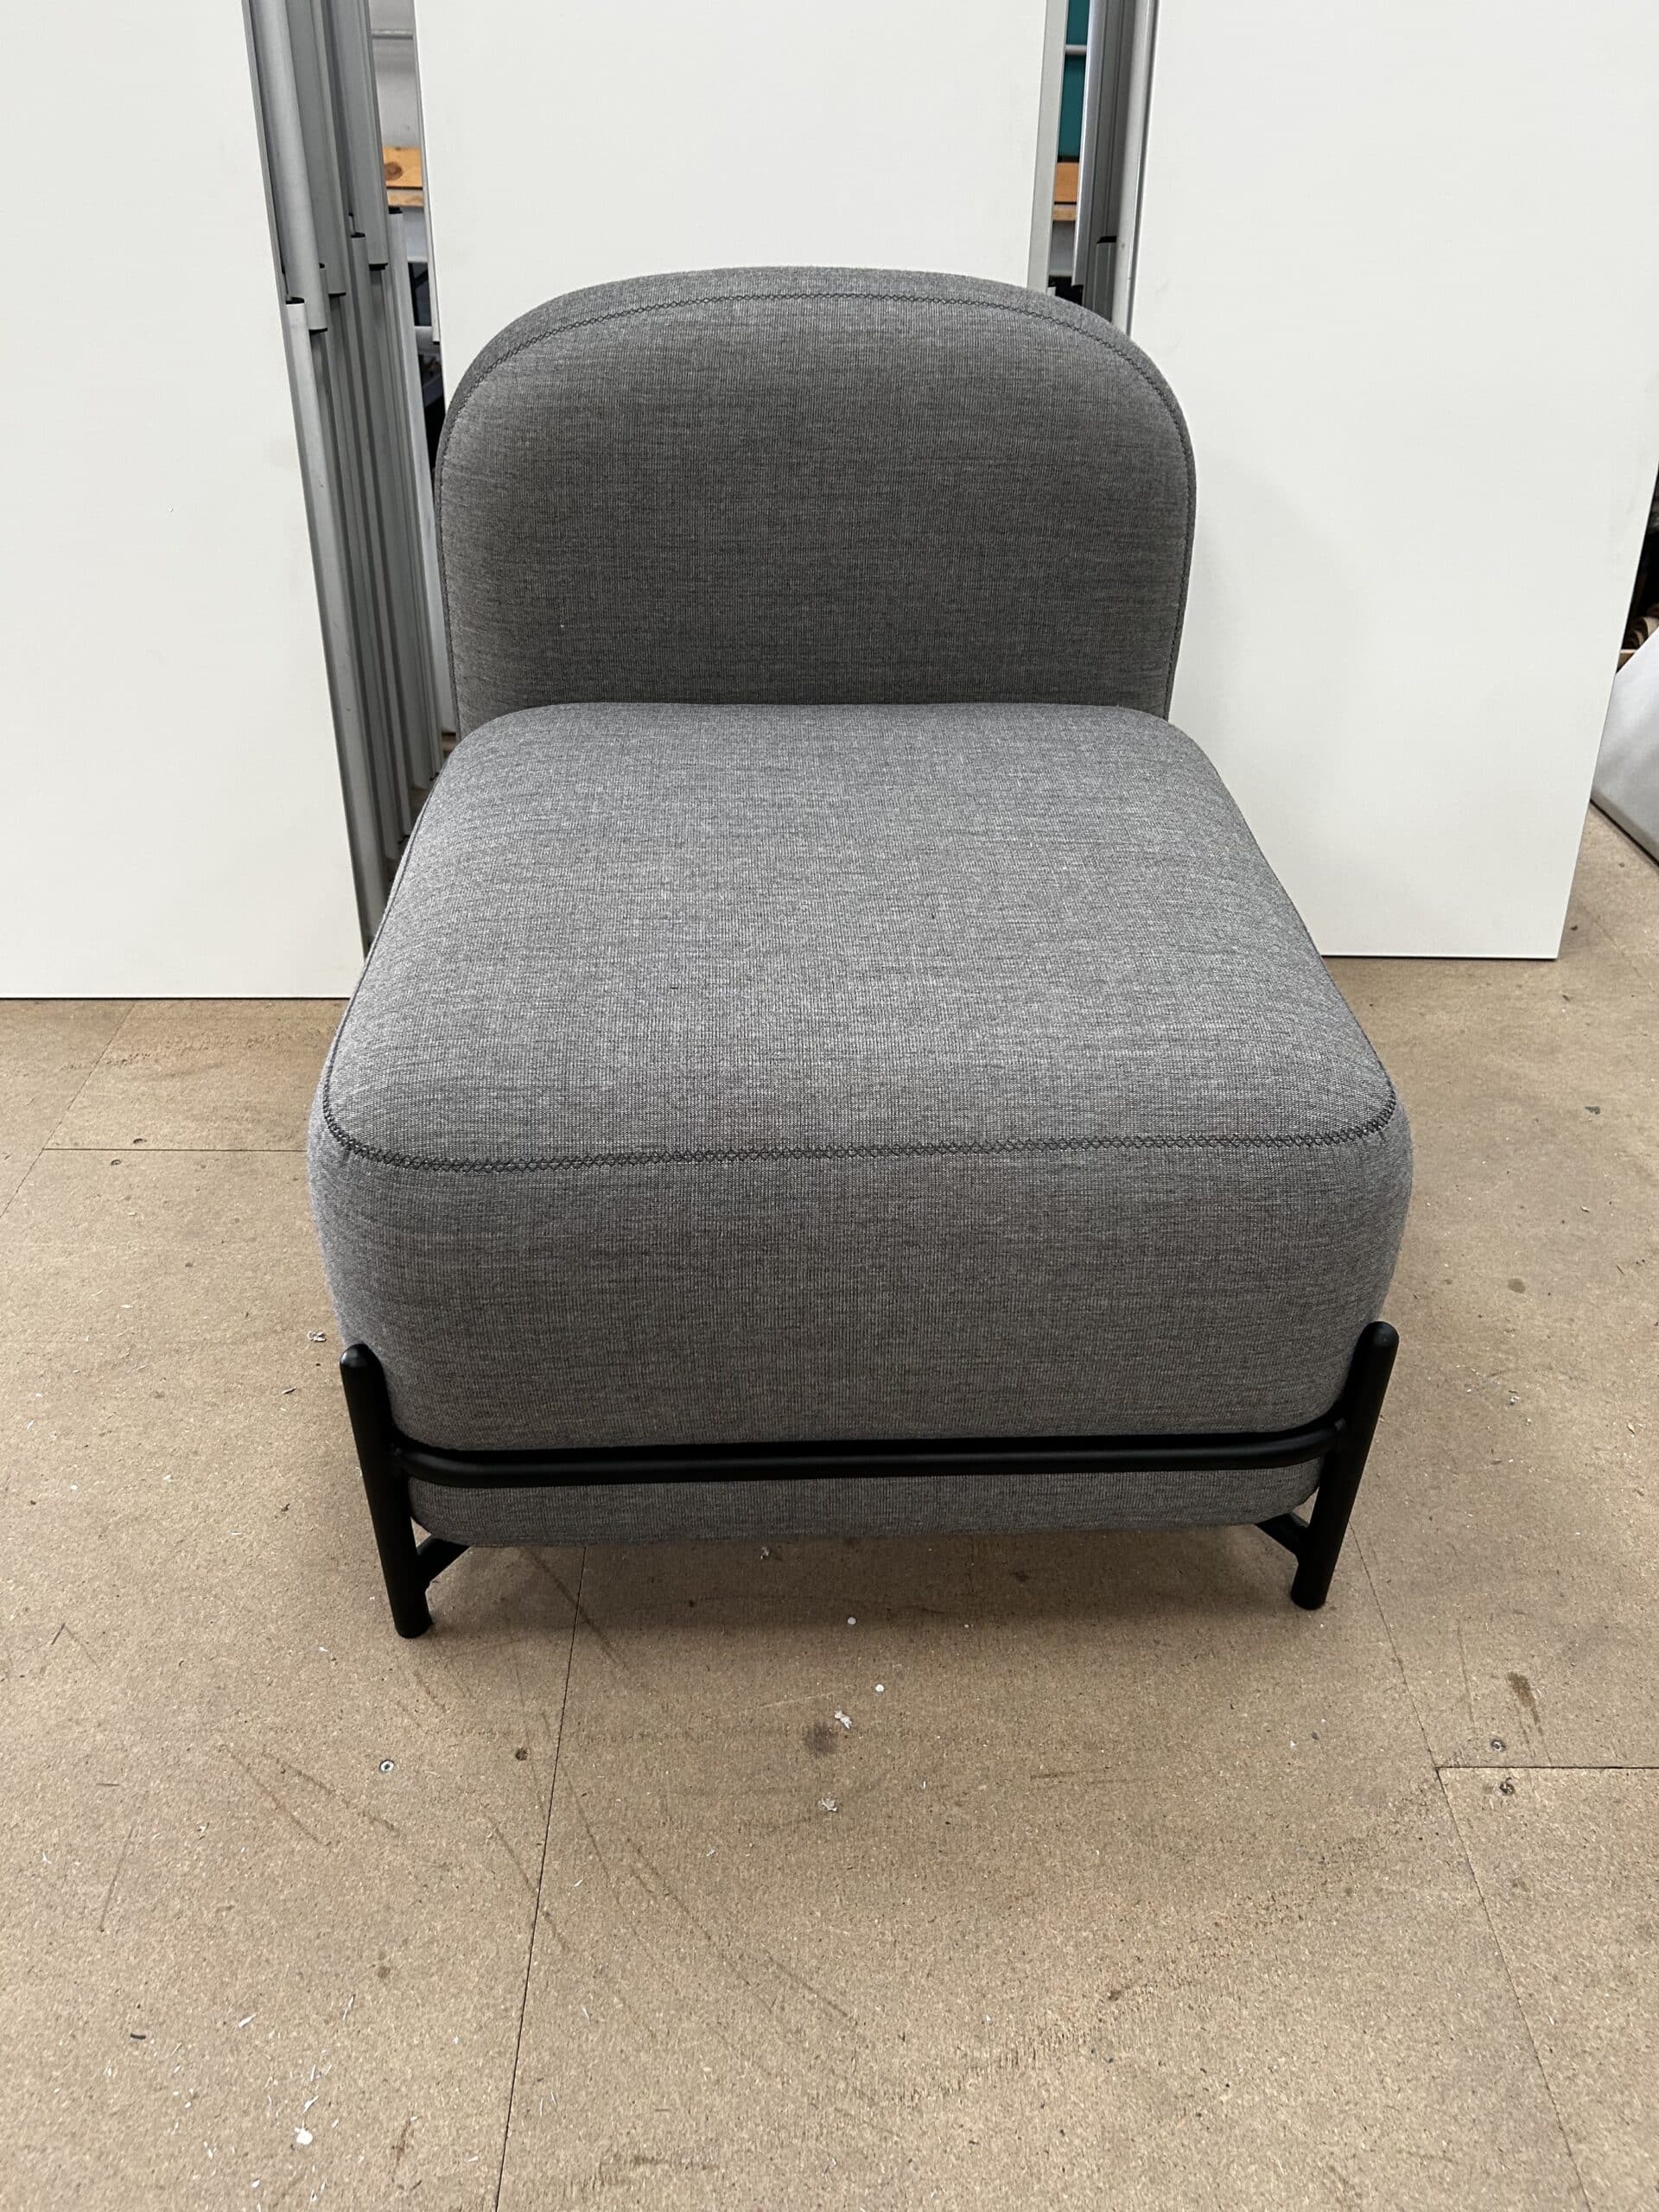 Frovi Flord Modular Breakout Seating System in Grey Cloth on Black Frame